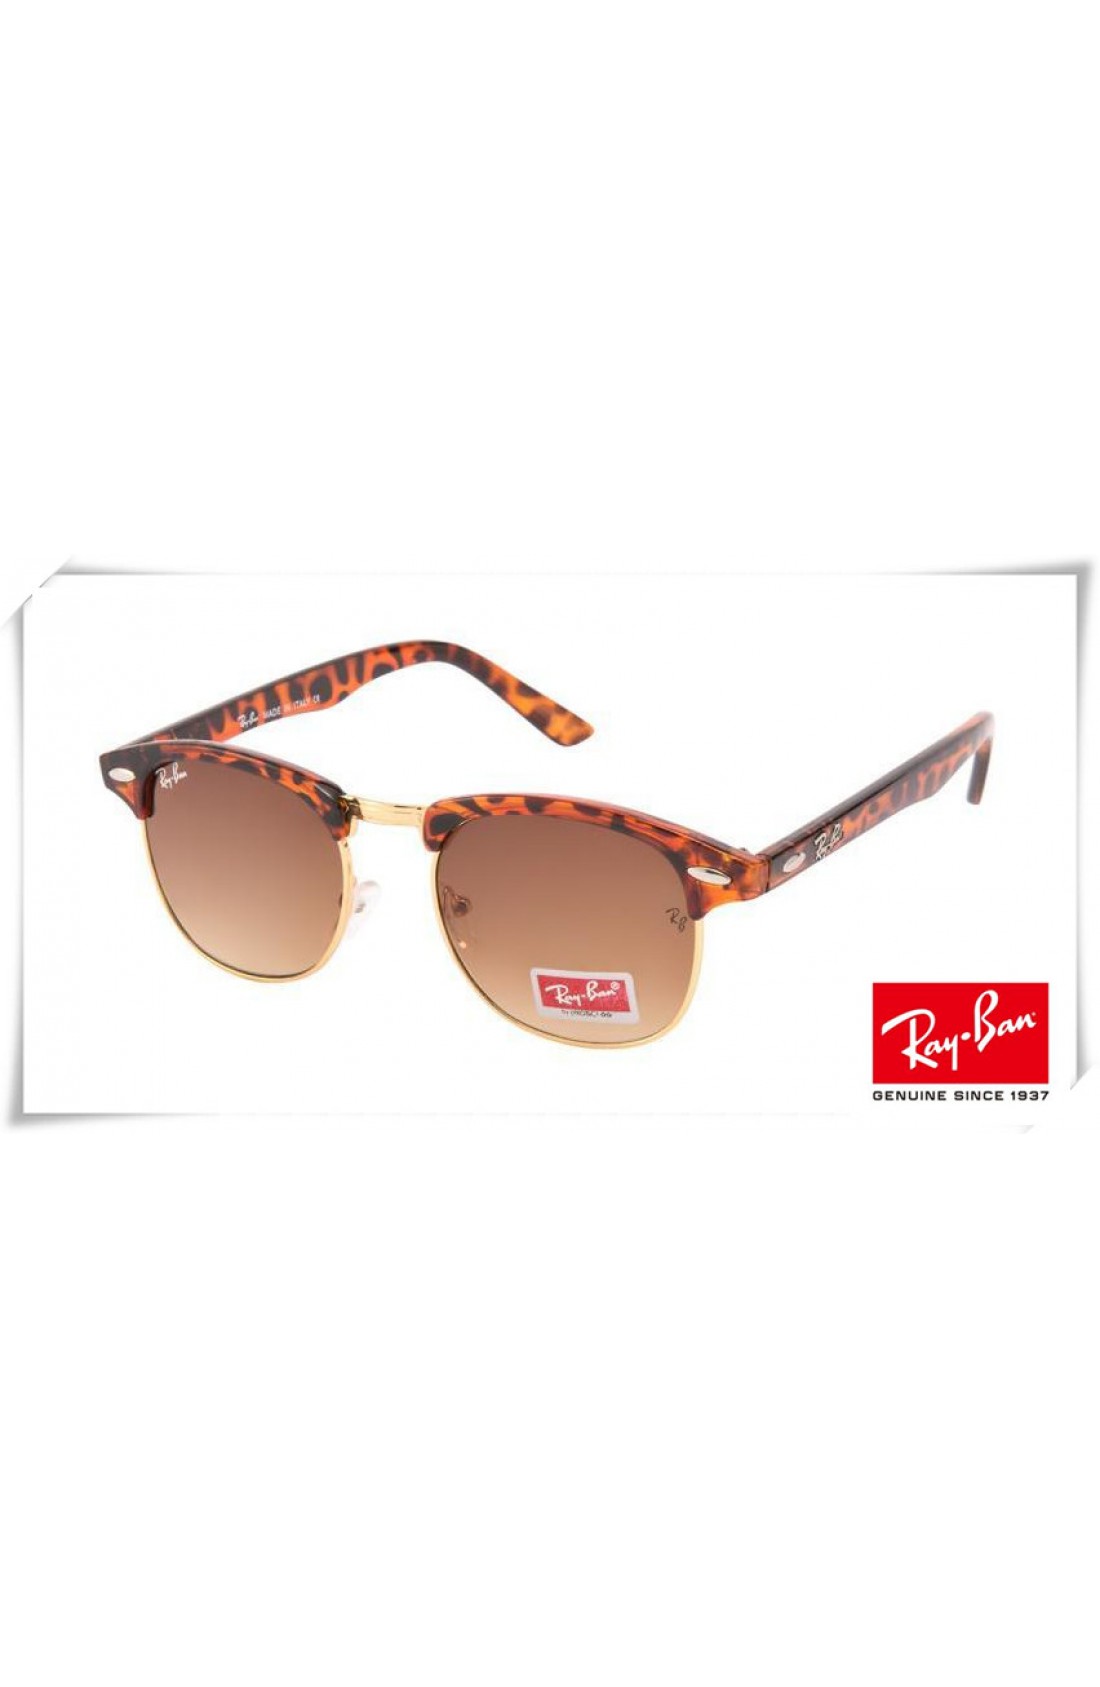 ray ban rb3016 classic clubmaster sunglasses